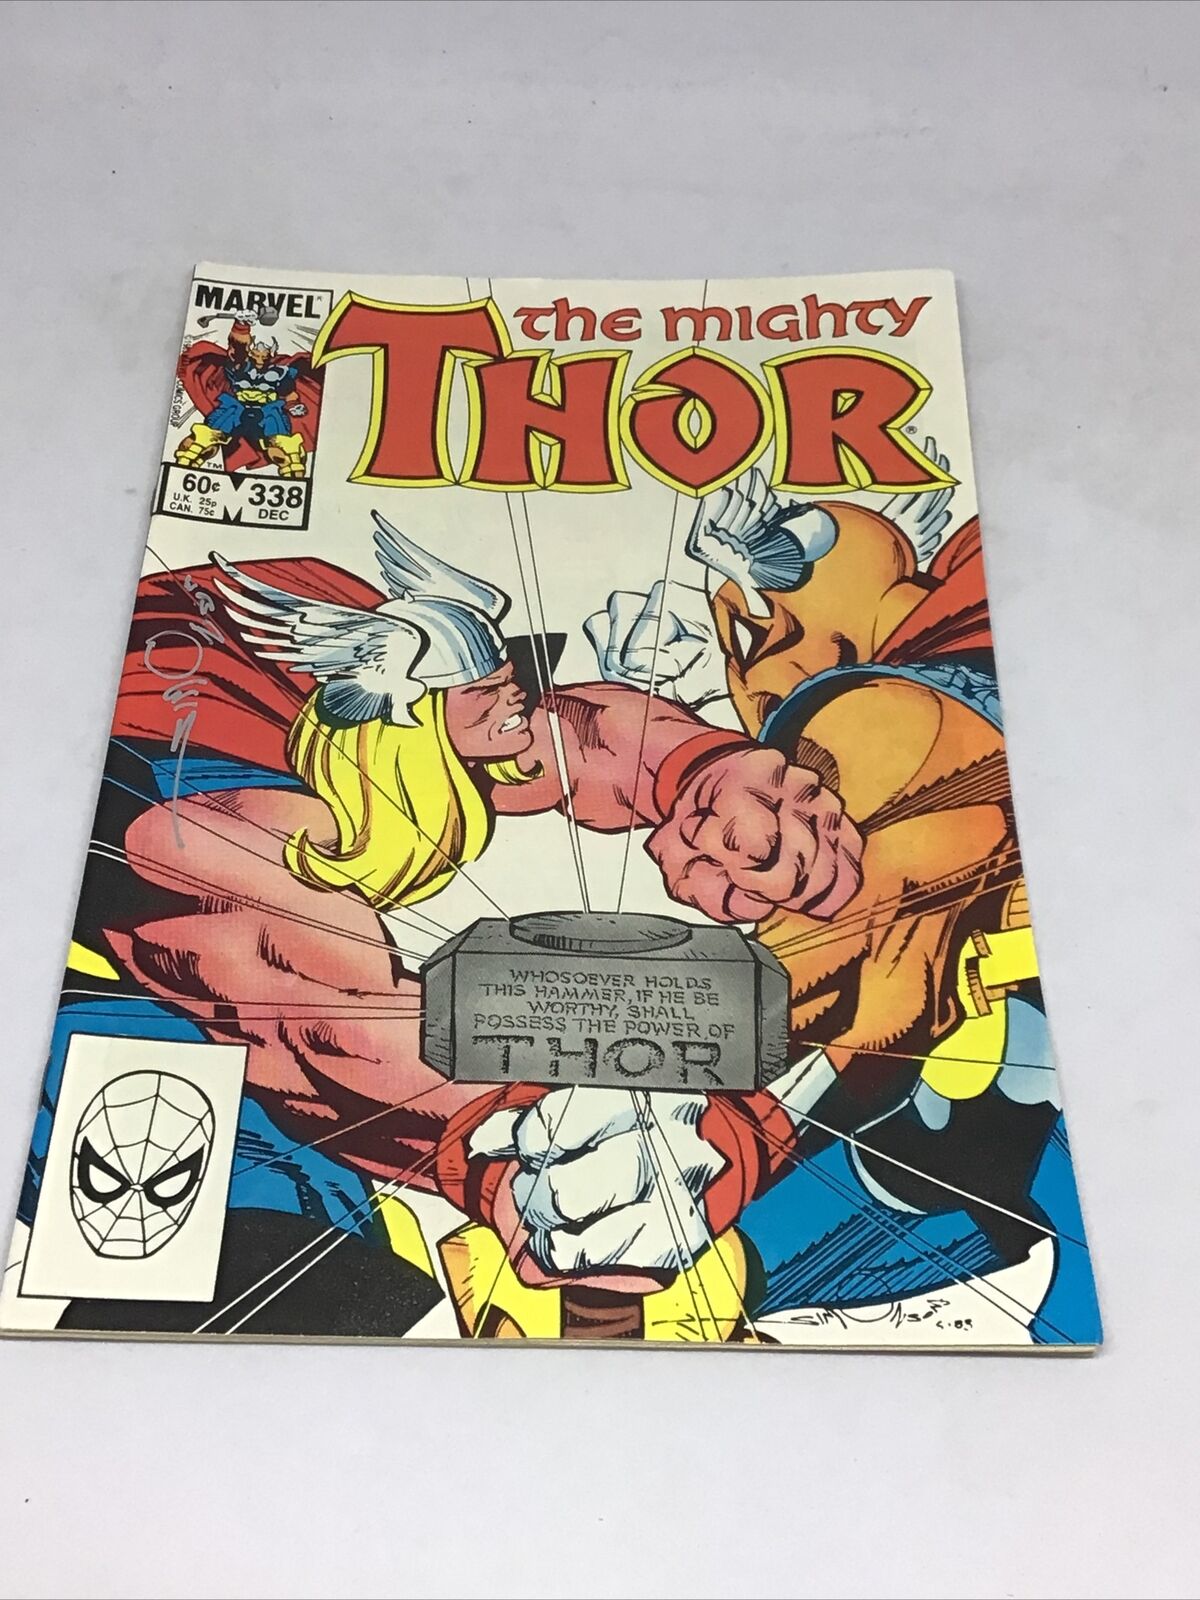 1983 Marvel Comics Group The Mighty Thor #338 Signed by Walt Simonson RARE